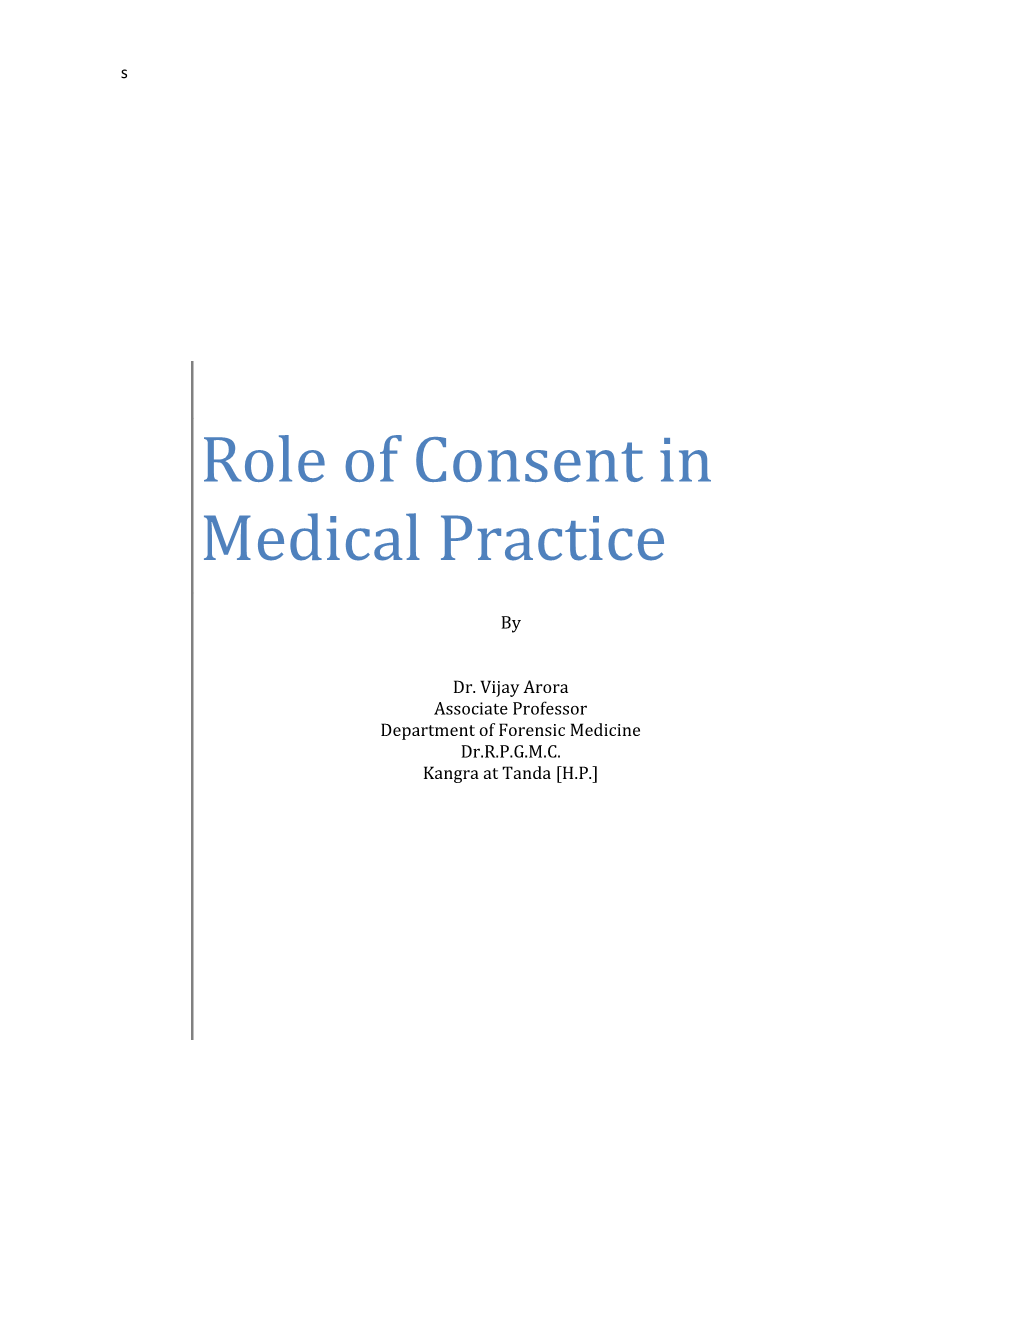 Role of Consent in Medical Practice